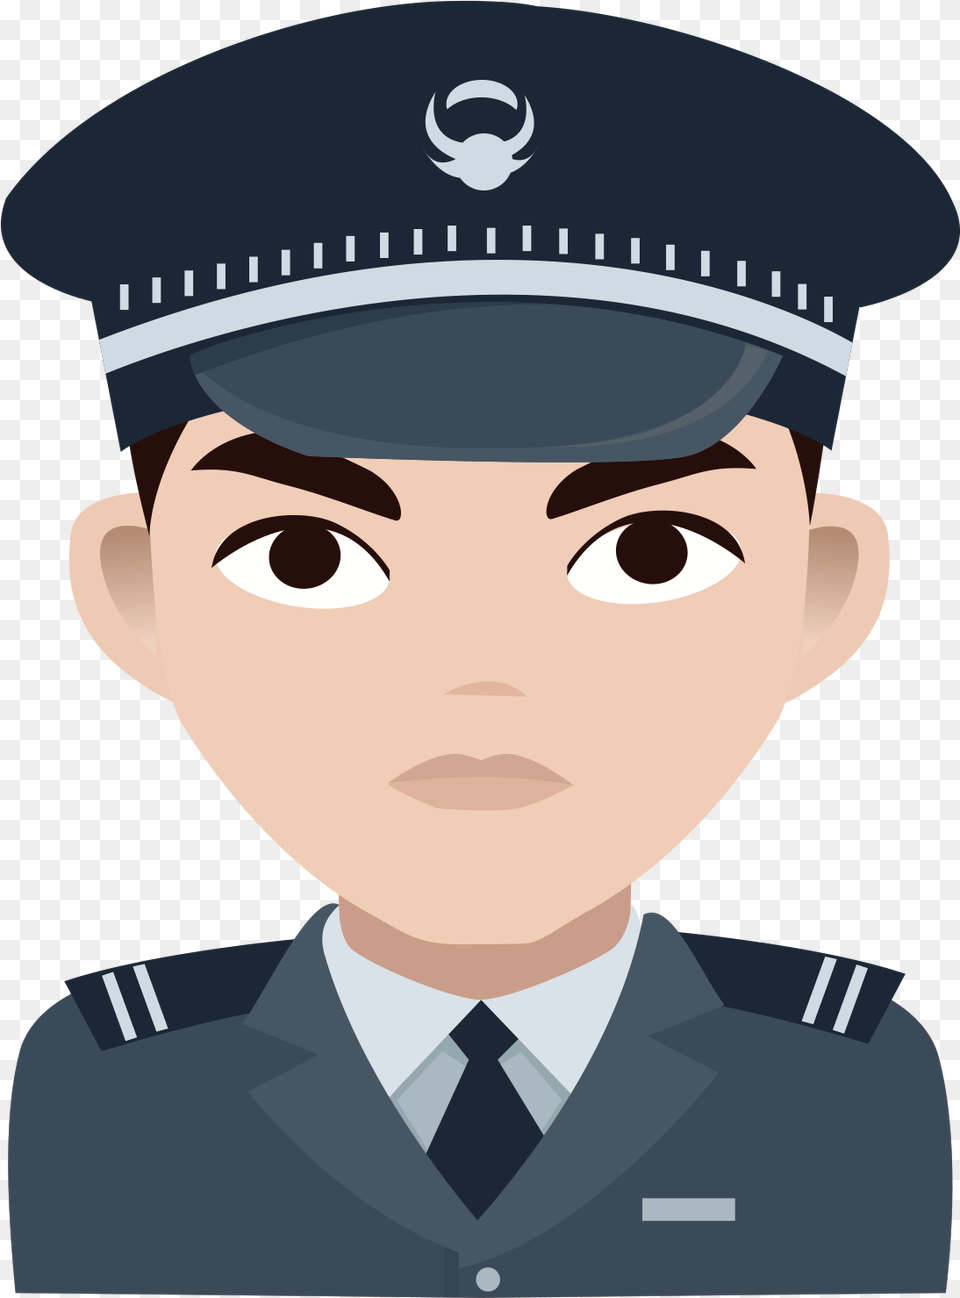 Flat Character Avatar Portrait And Psd Cartoon, Baby, Person, Captain, Officer Png